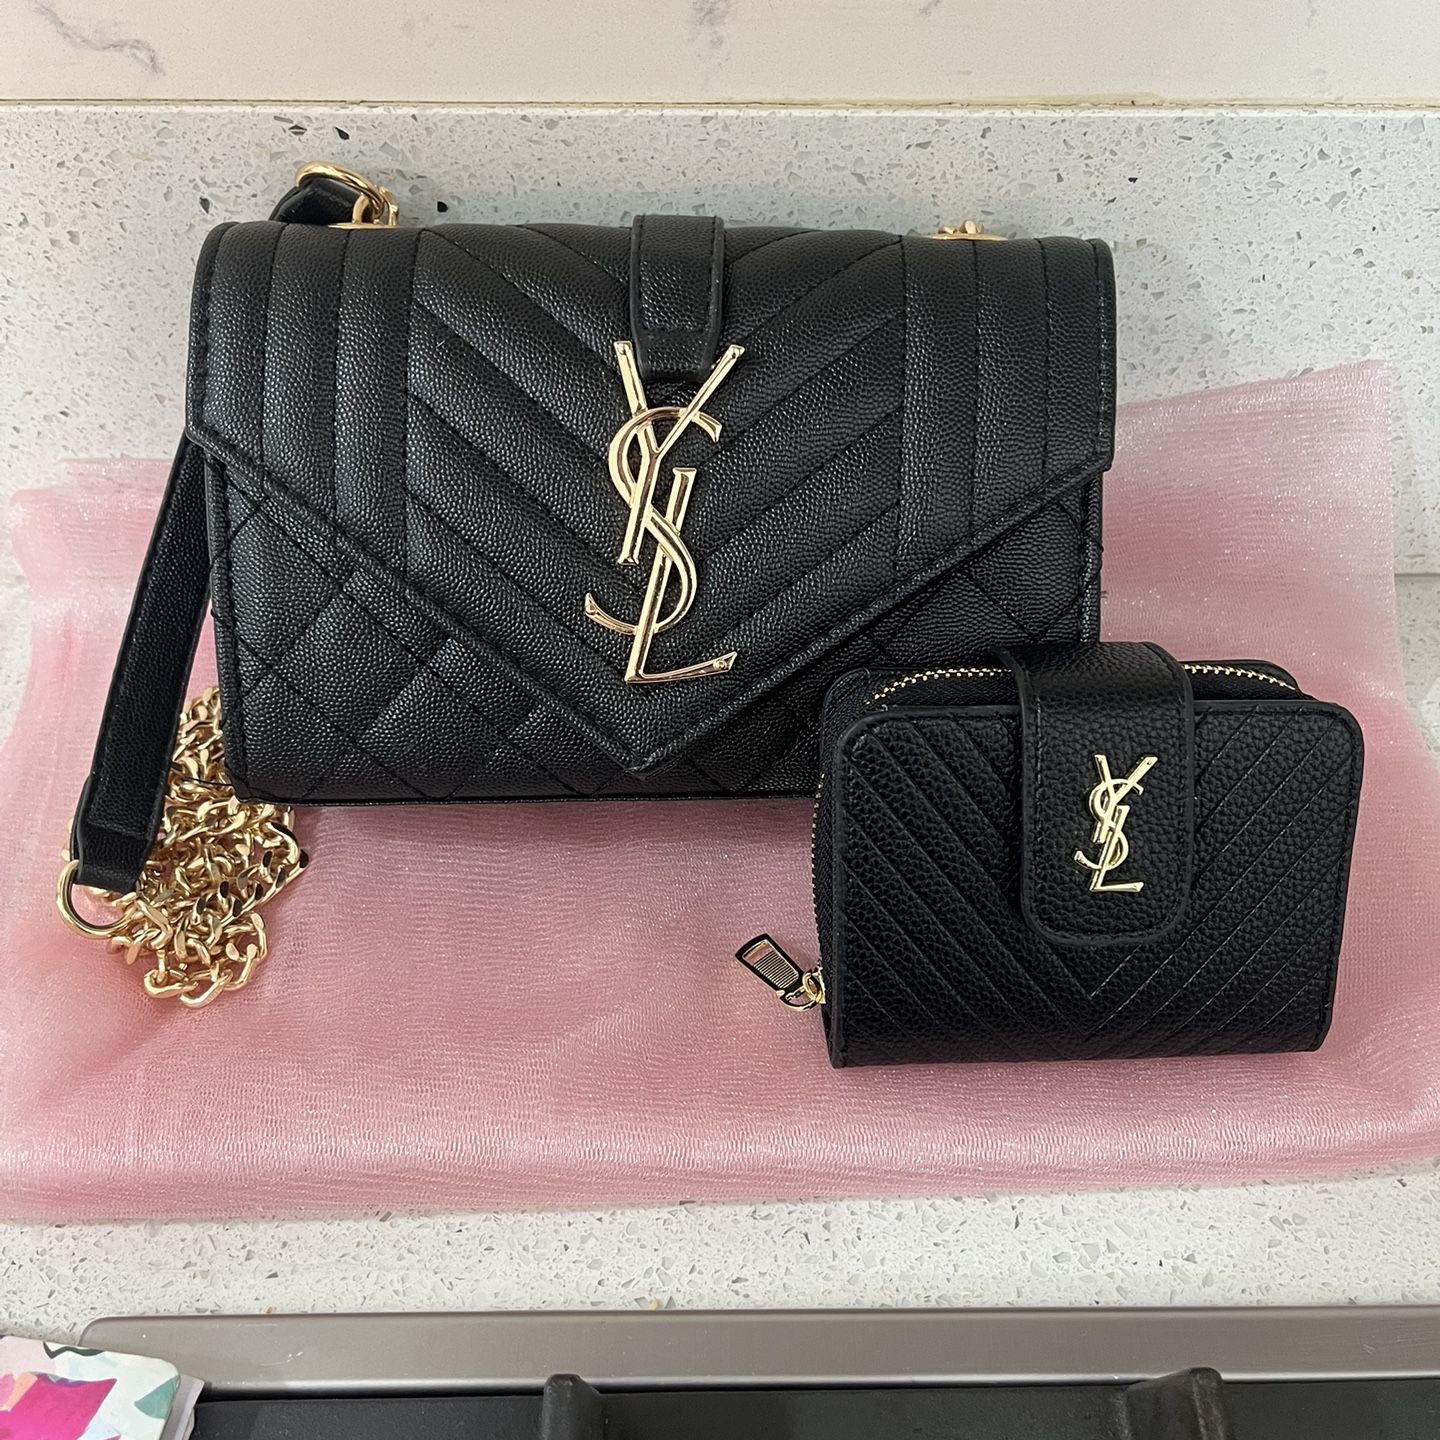 YSL Bag and matching wallet